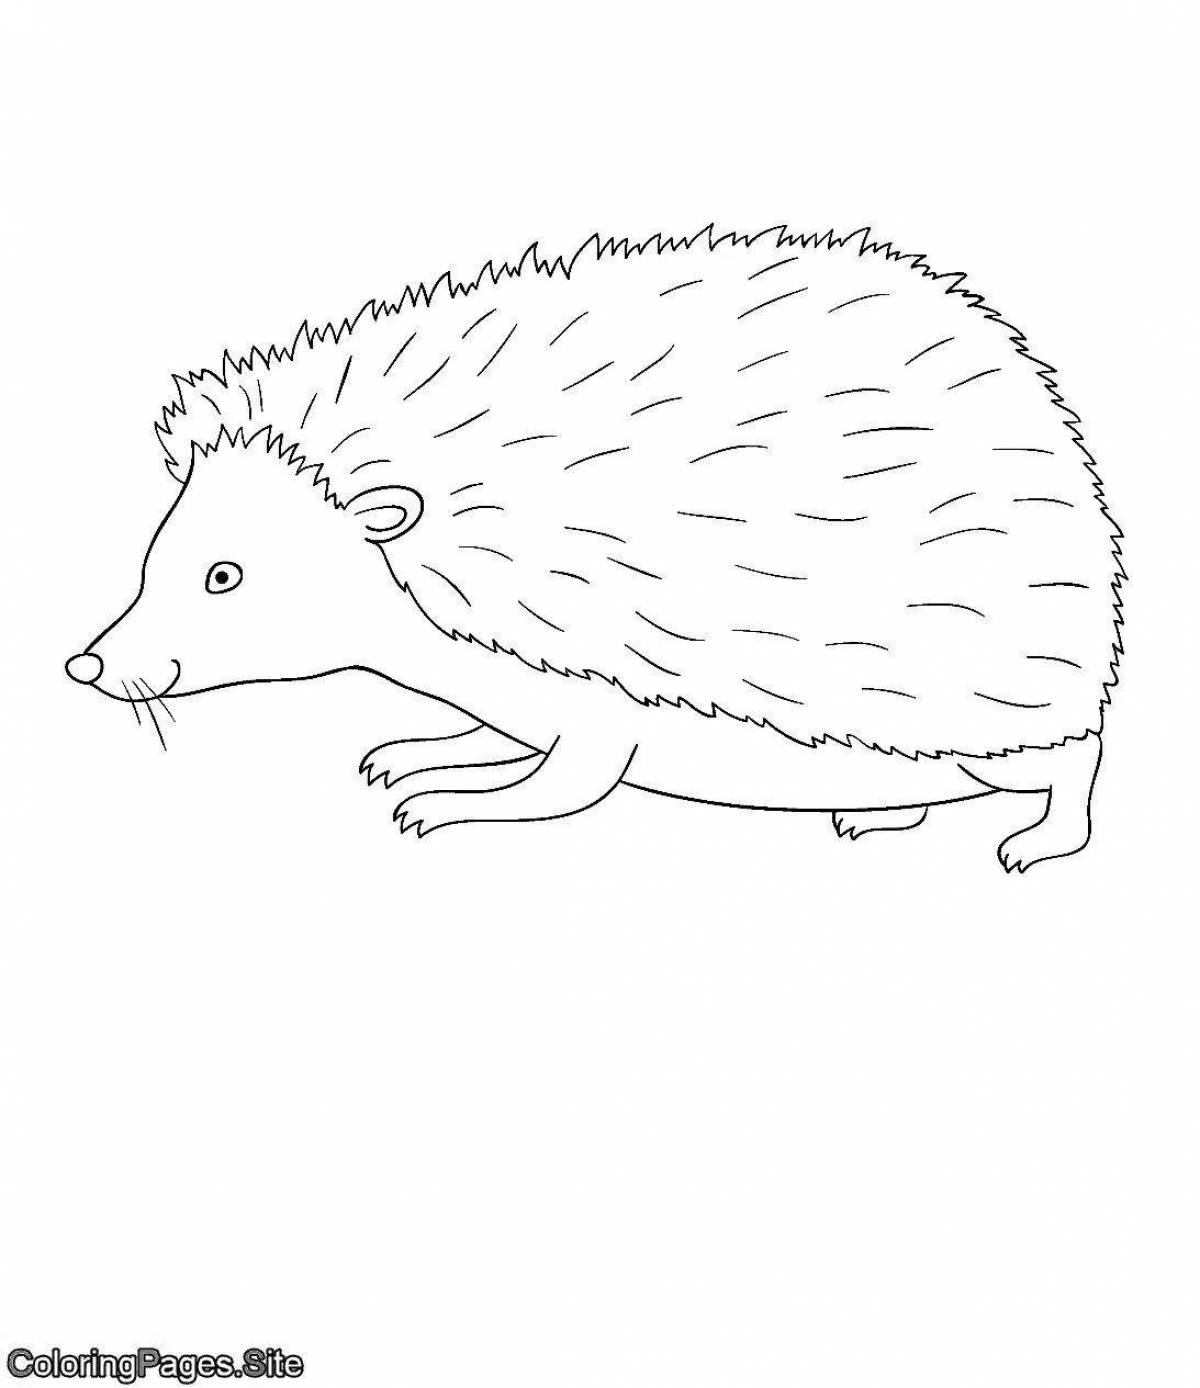 Coloring page mischievous big-eared hedgehog